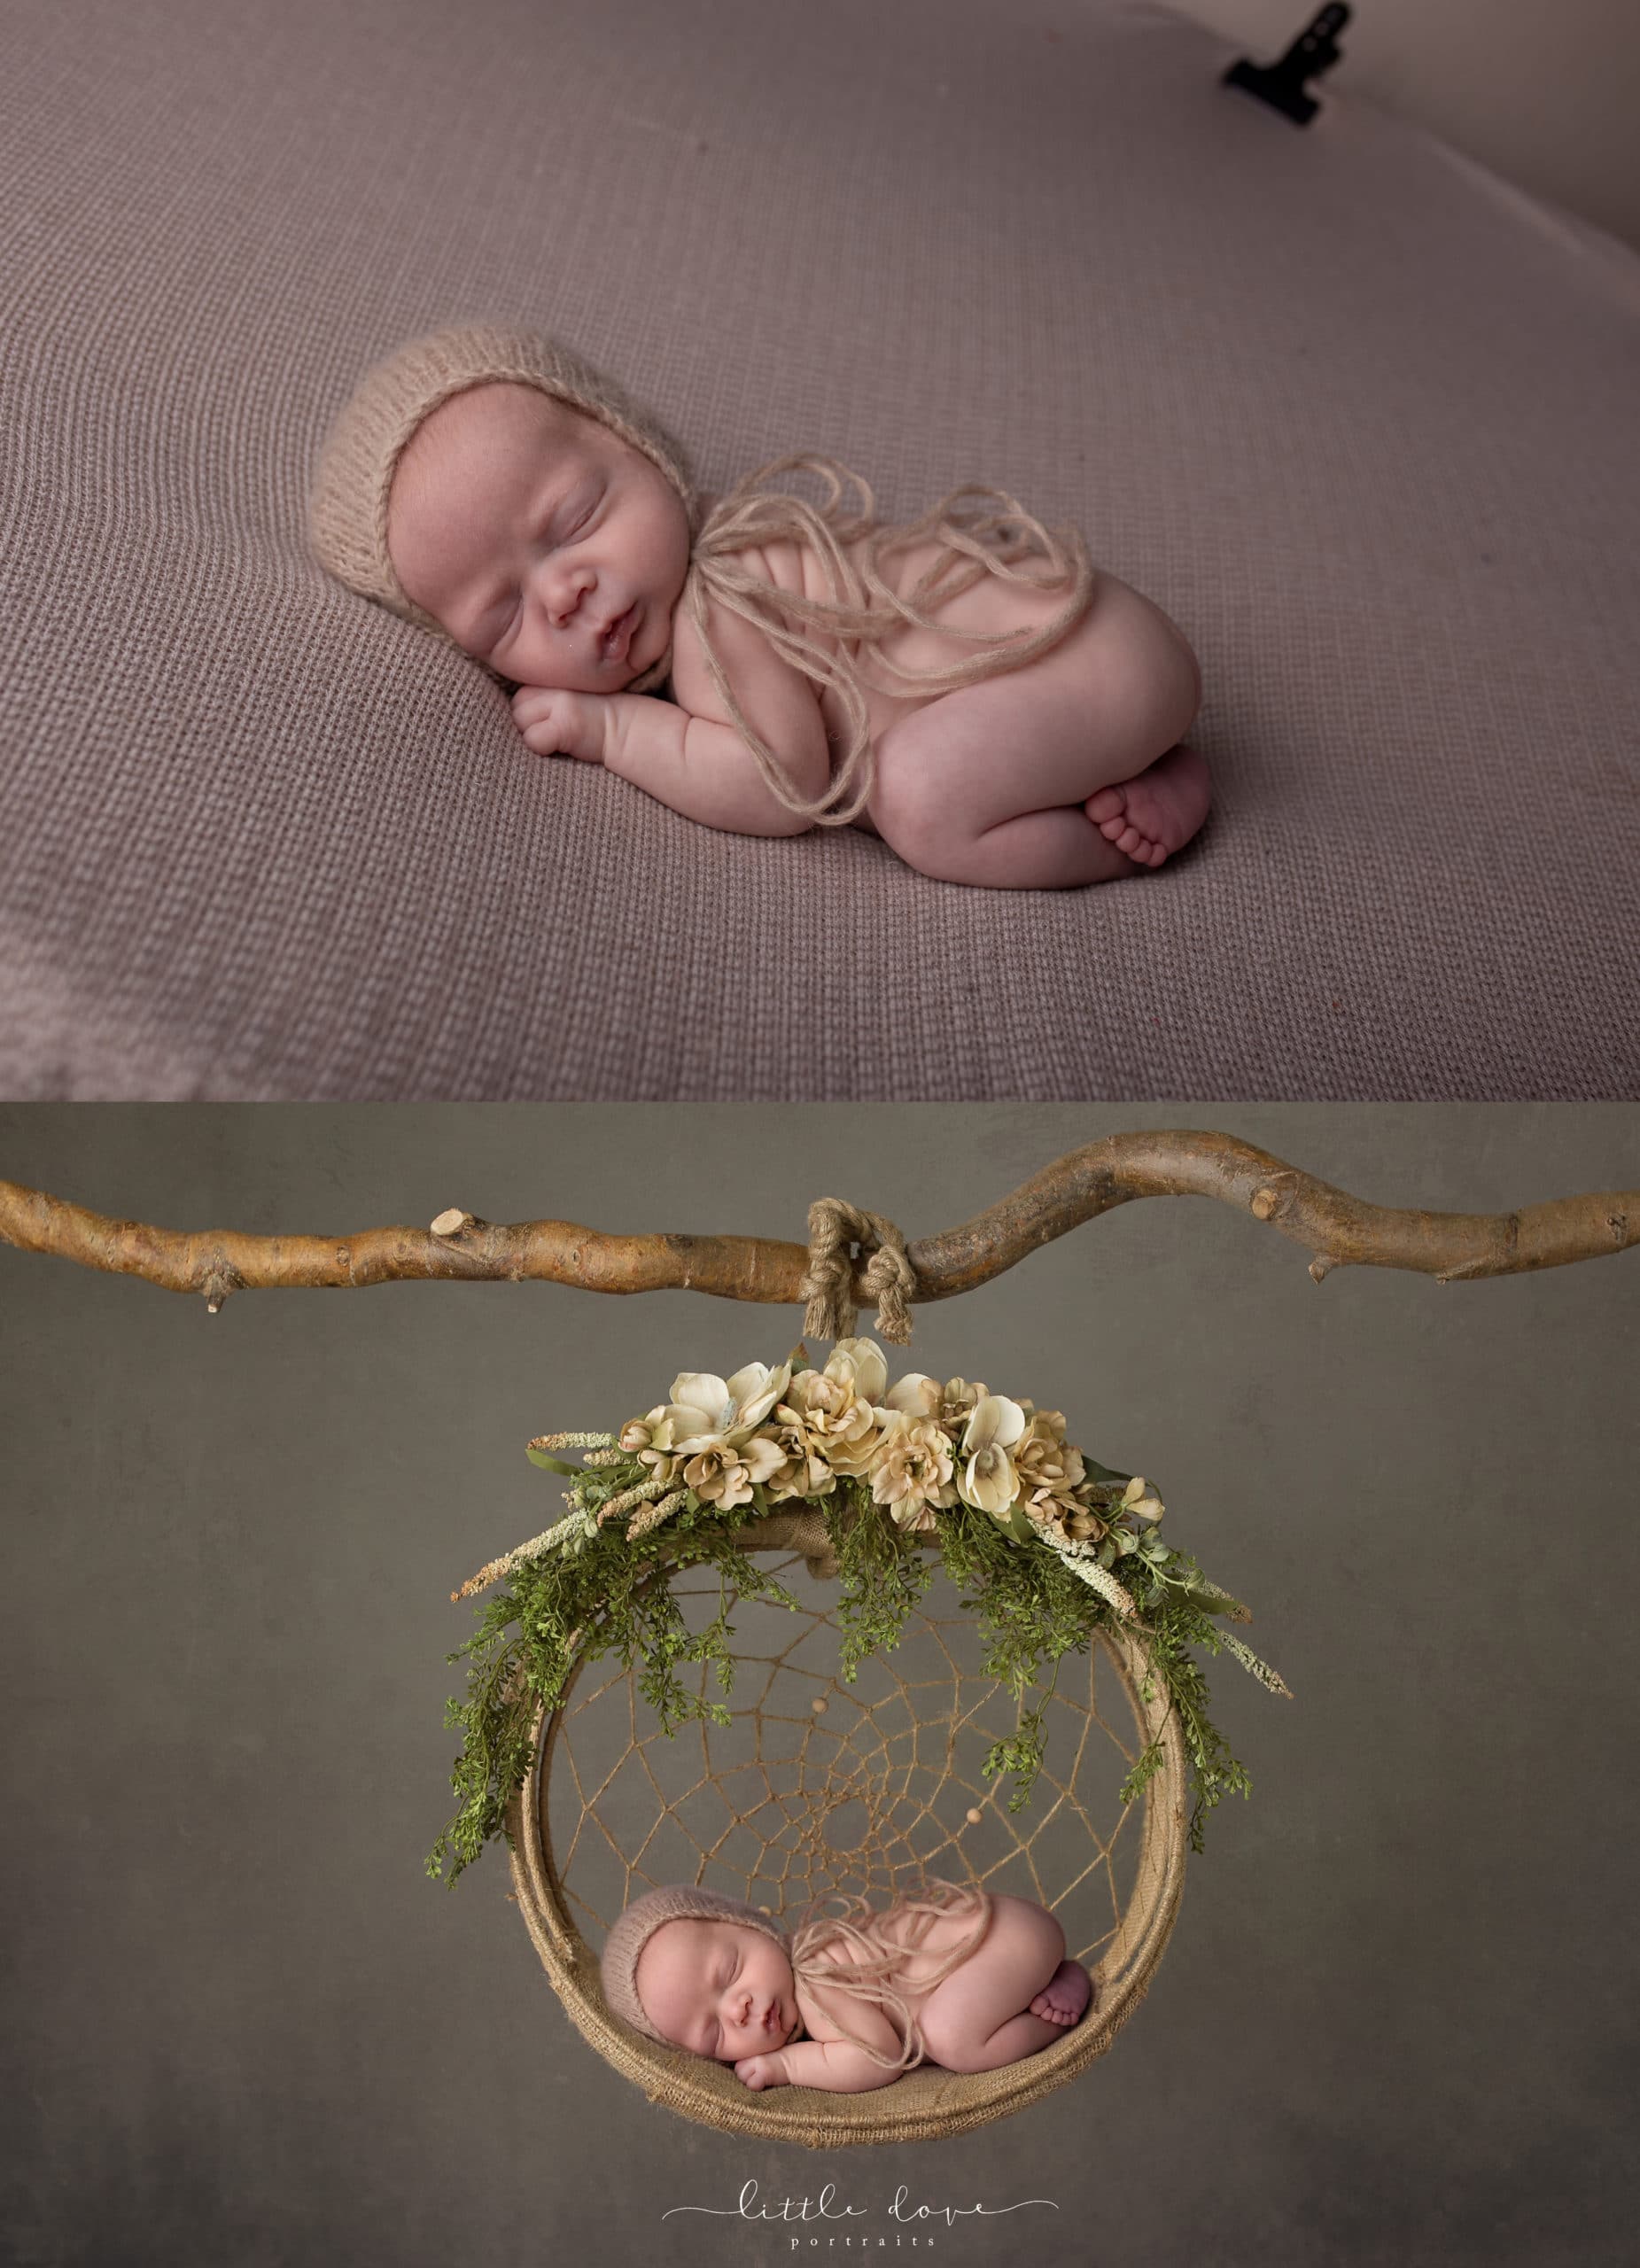 best newborn photographer safety - how to pick the right one for you